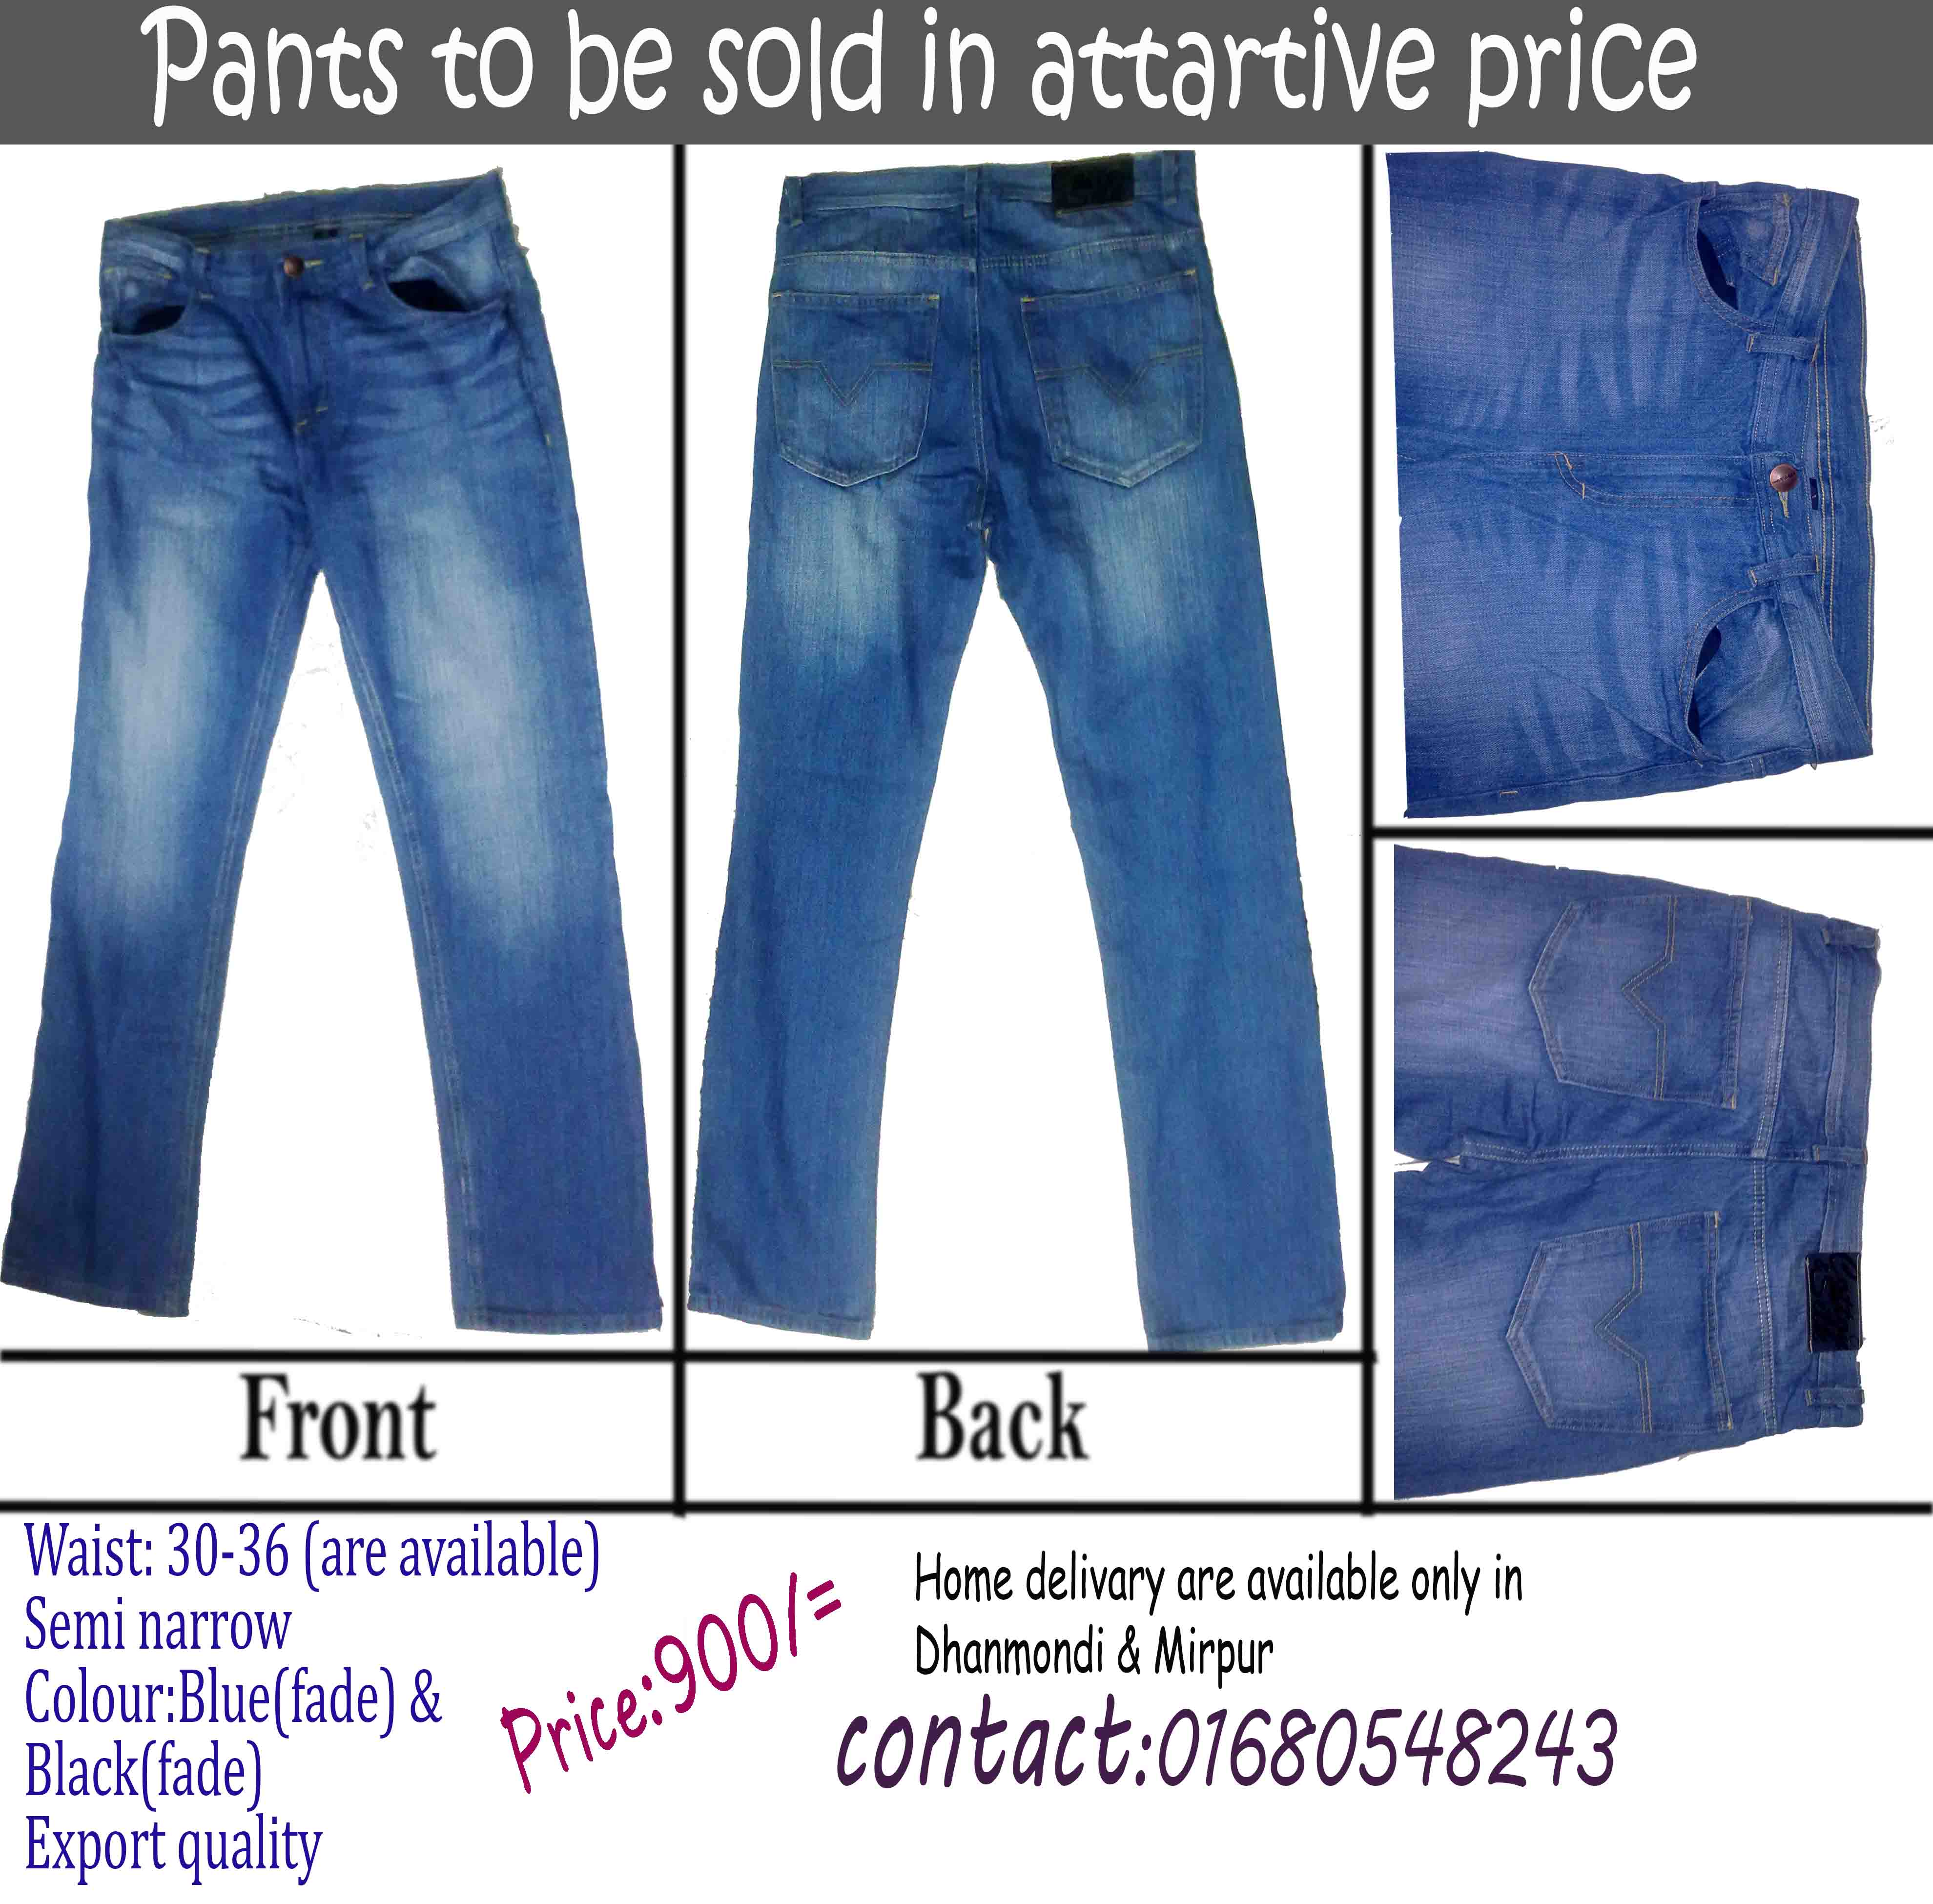 Jeans Pants are available in attractive price large image 0